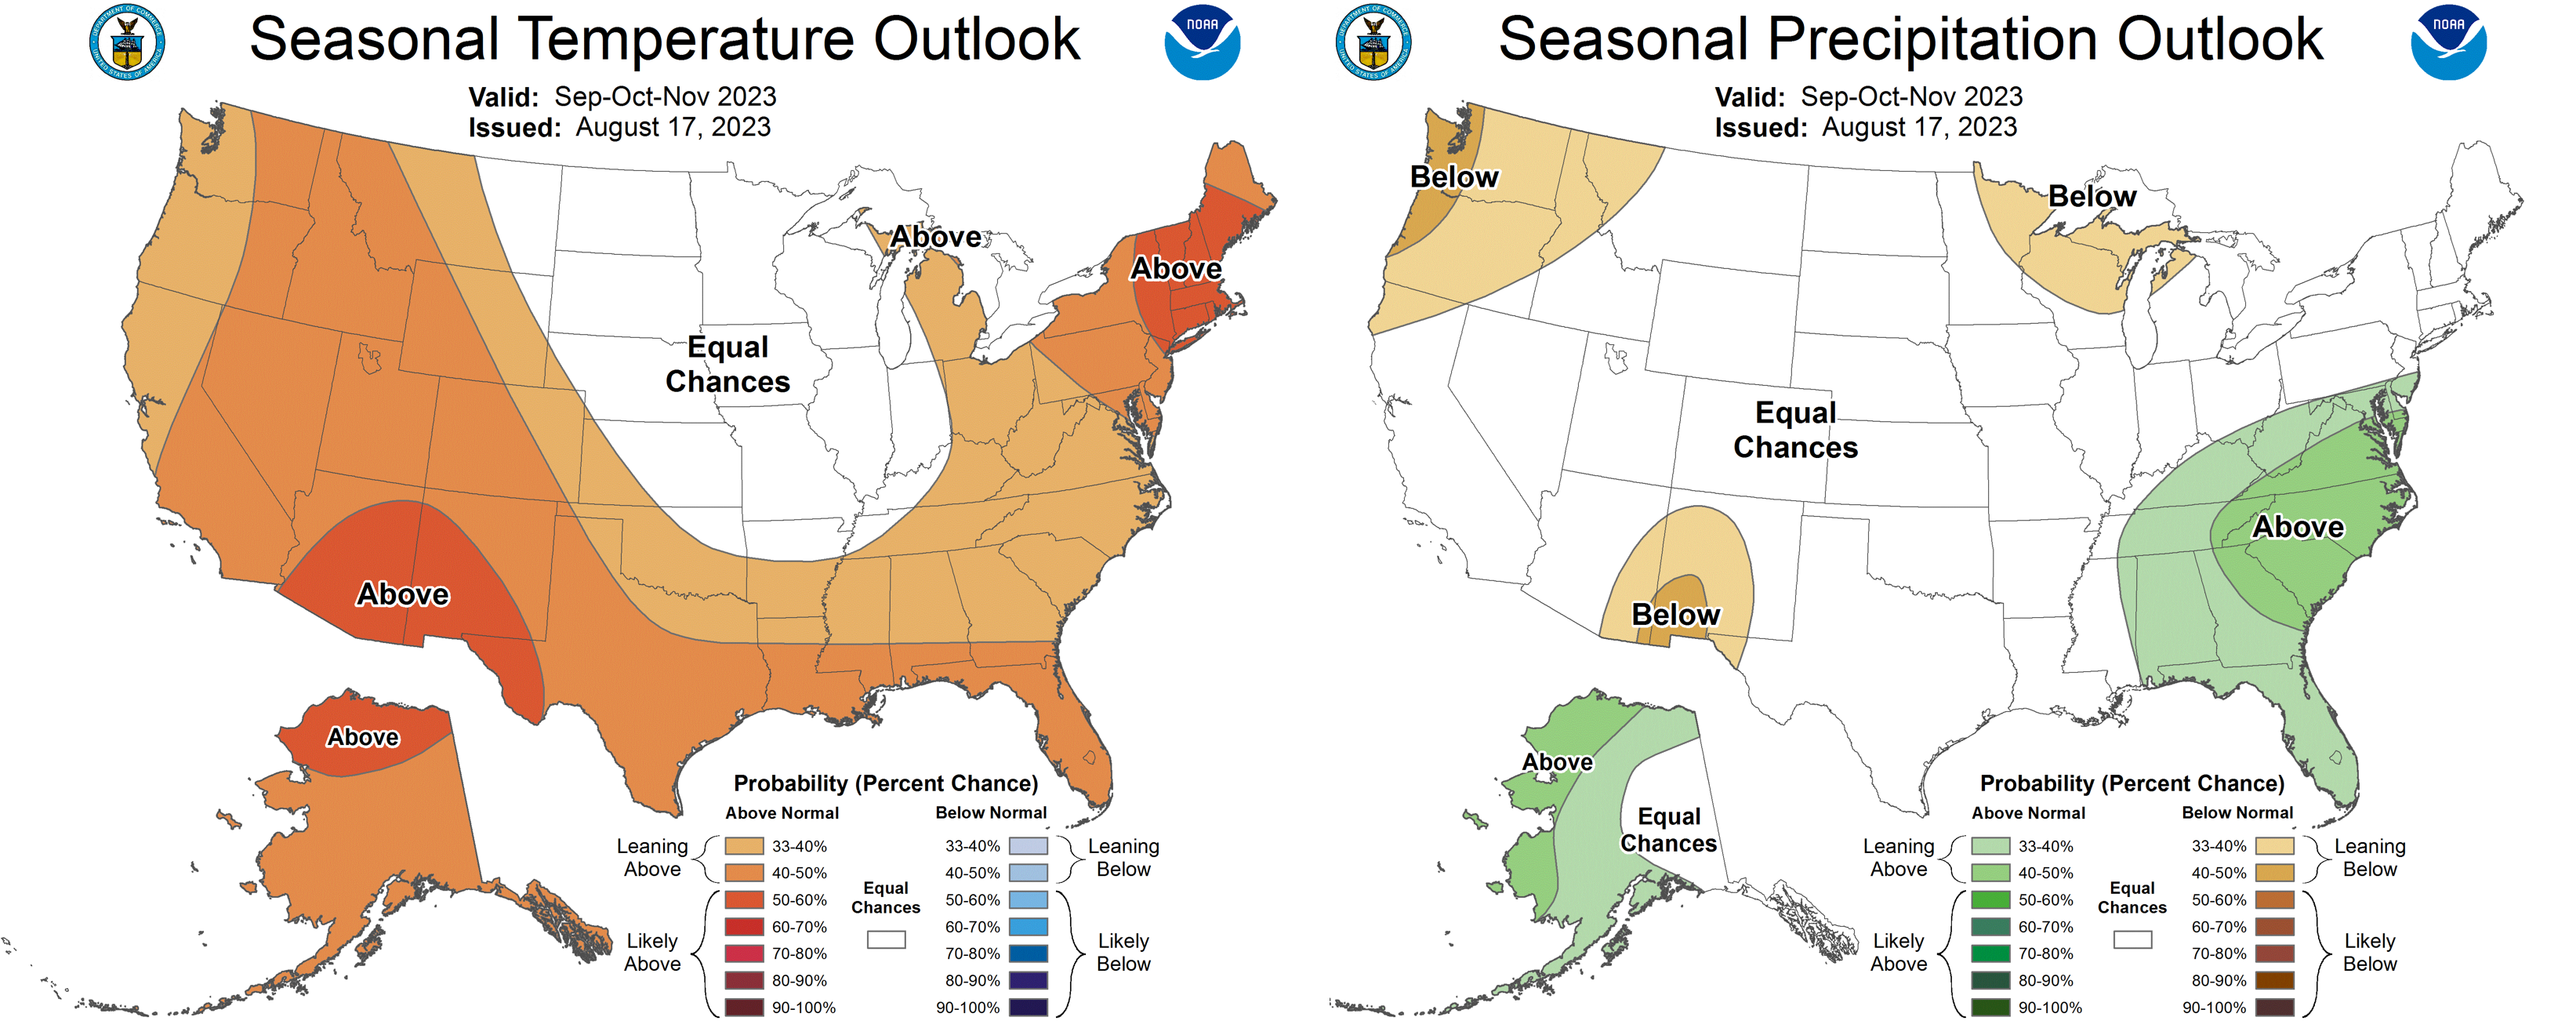 CPC temperature outlook for Sep/Oct/Nov showing primarily warmer than average conditions.